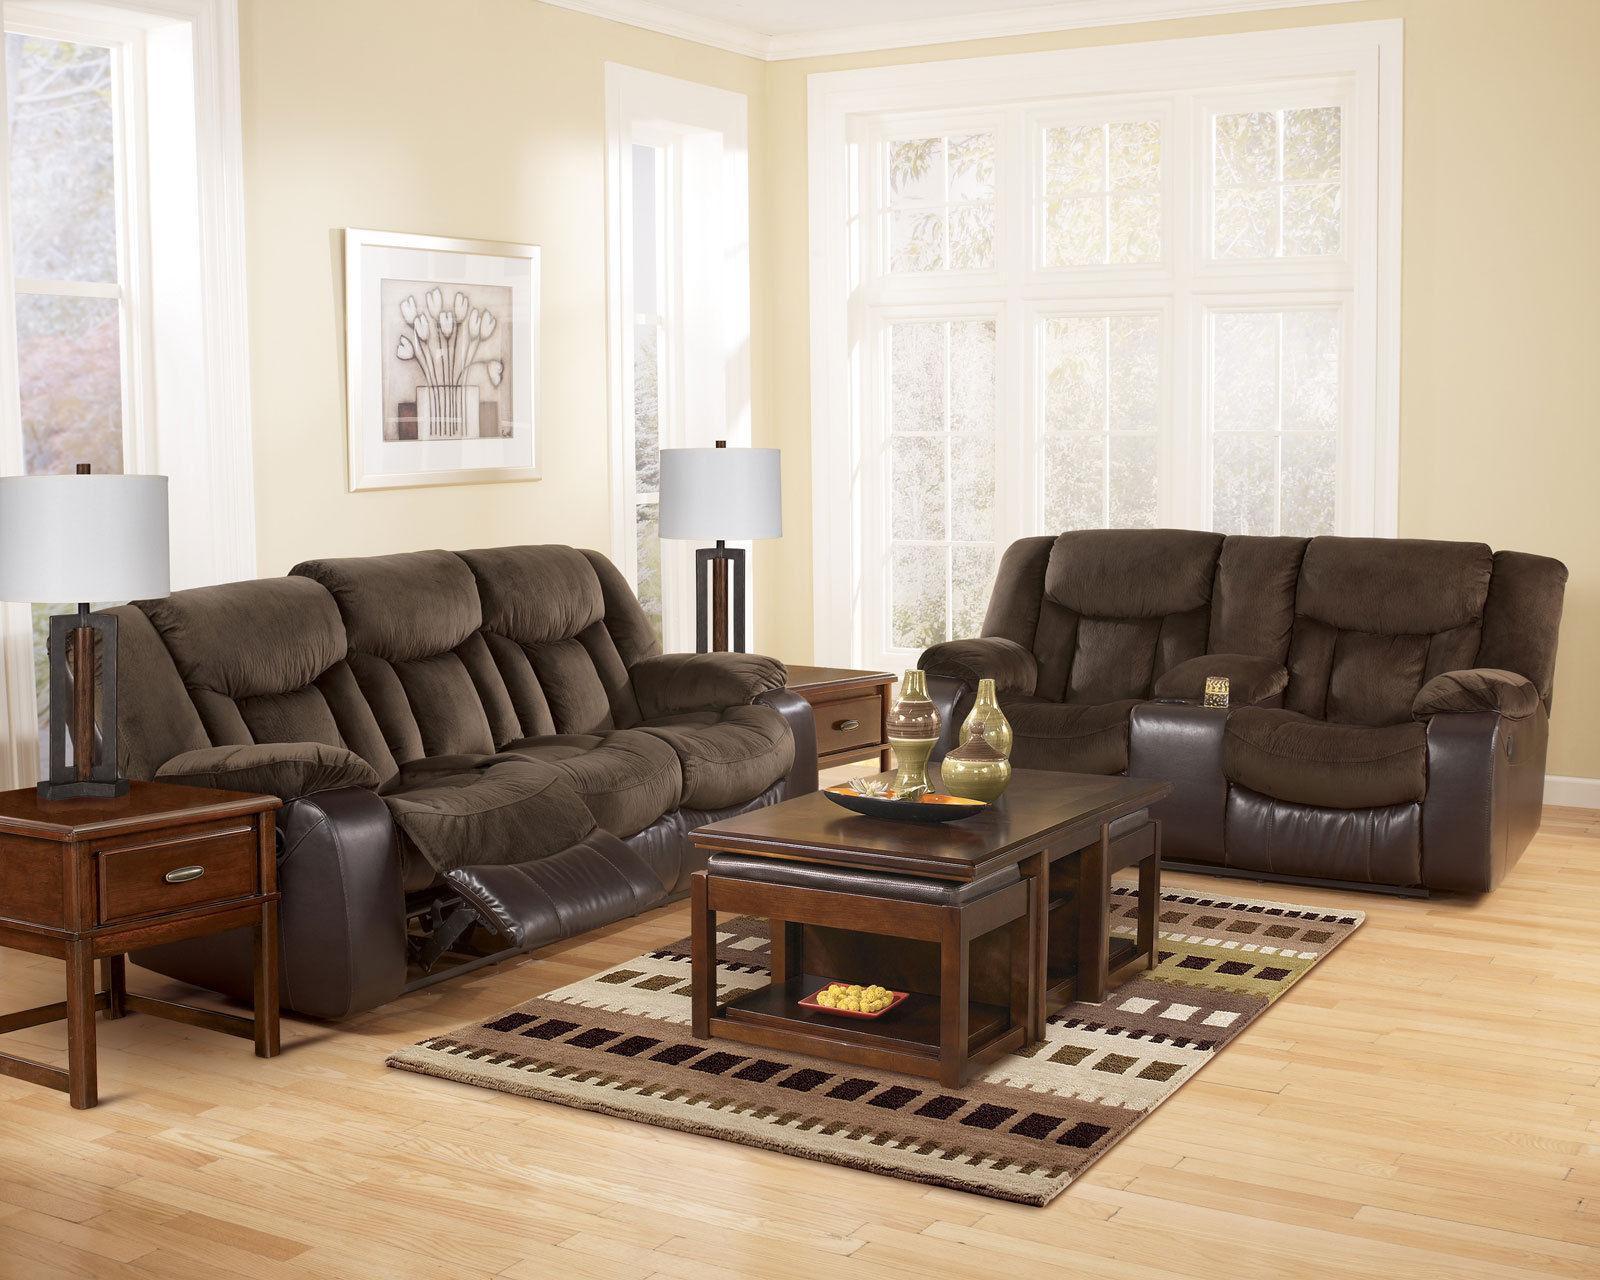 ALLEGRO Living Room Brown Microfiber & Faux Leather Reclining Sofa ...